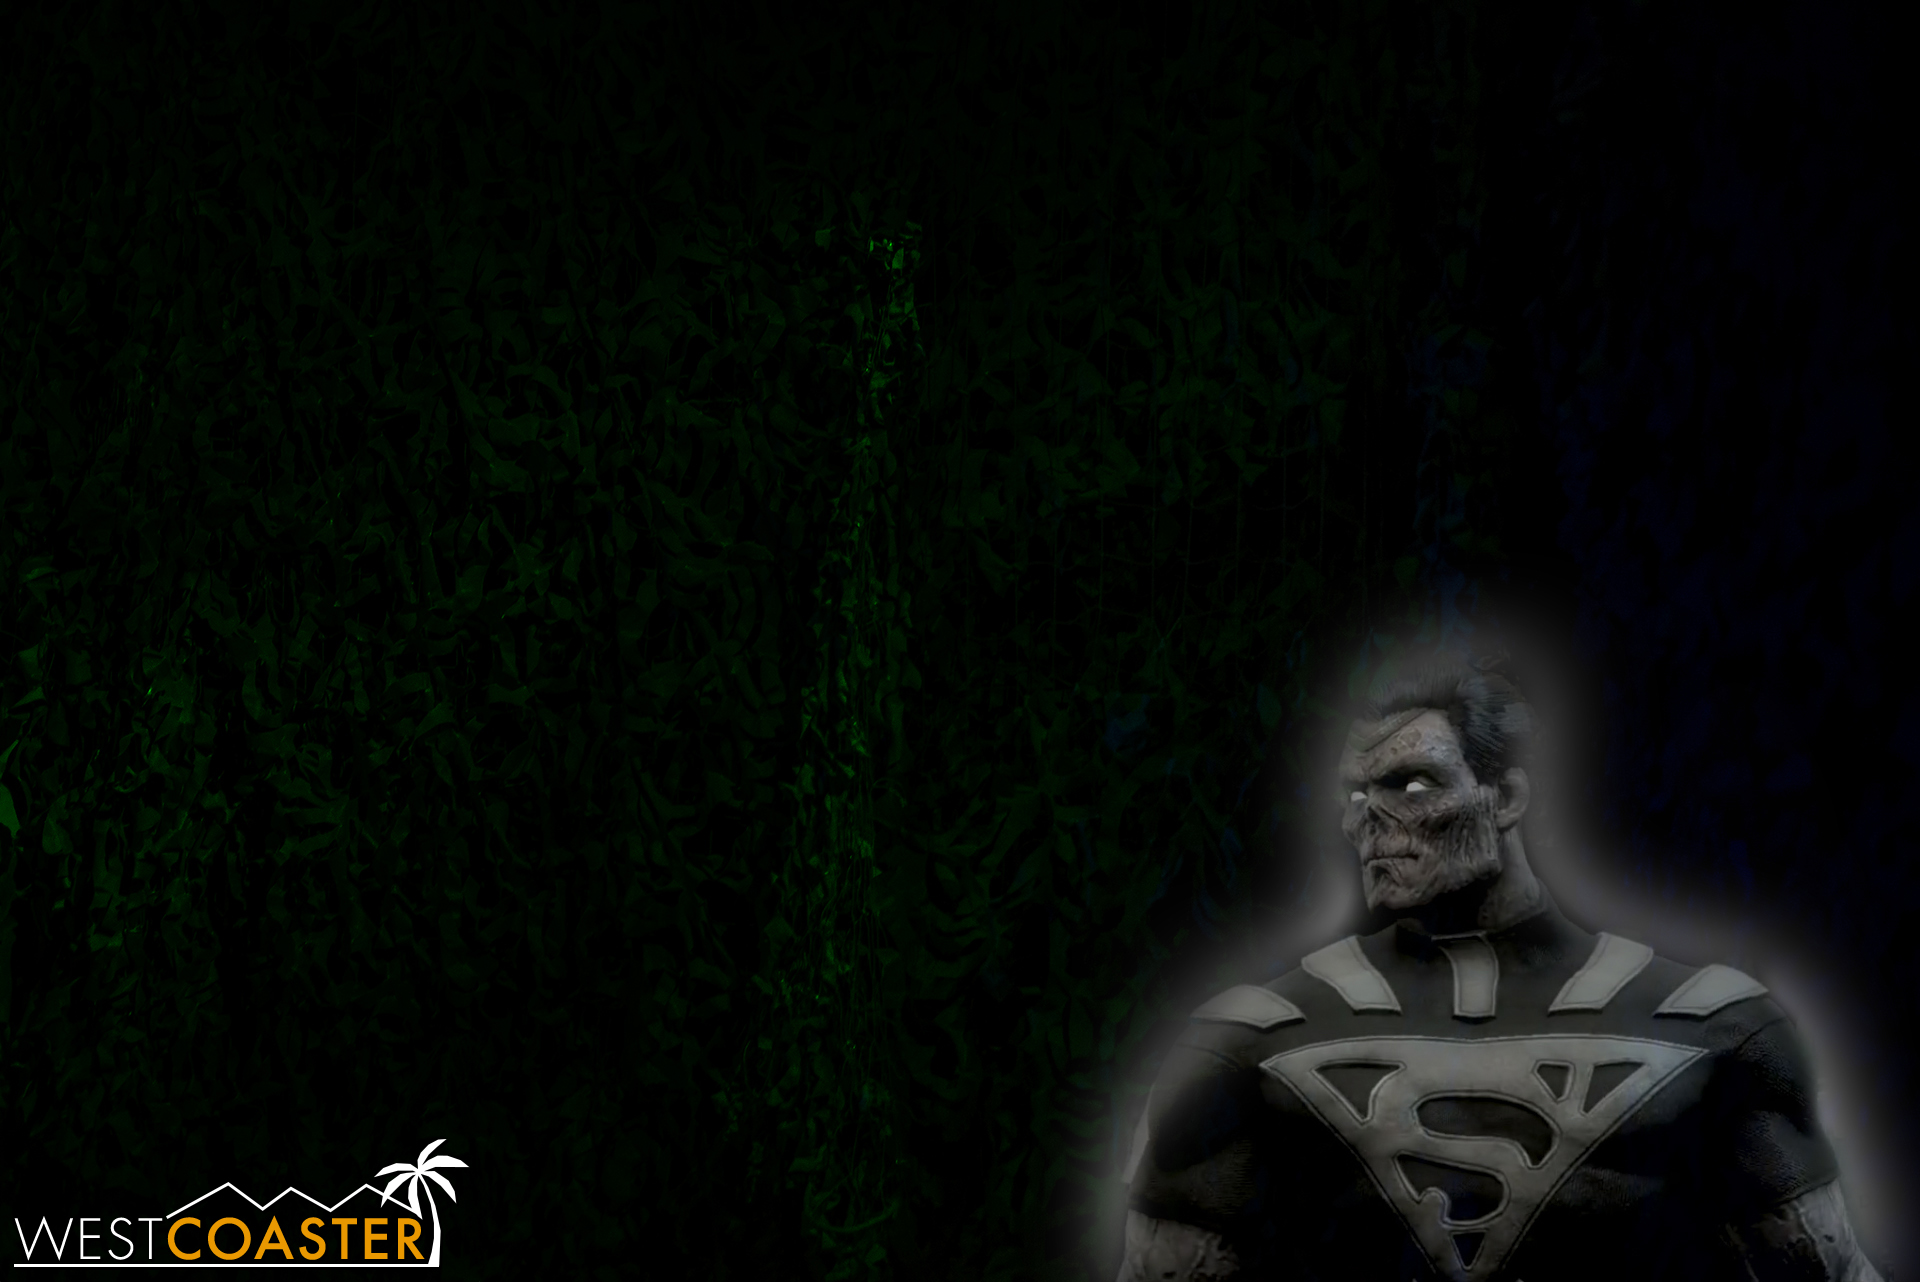  And then darkness.&nbsp; ...and spirits?&nbsp; Zombie Superman? 